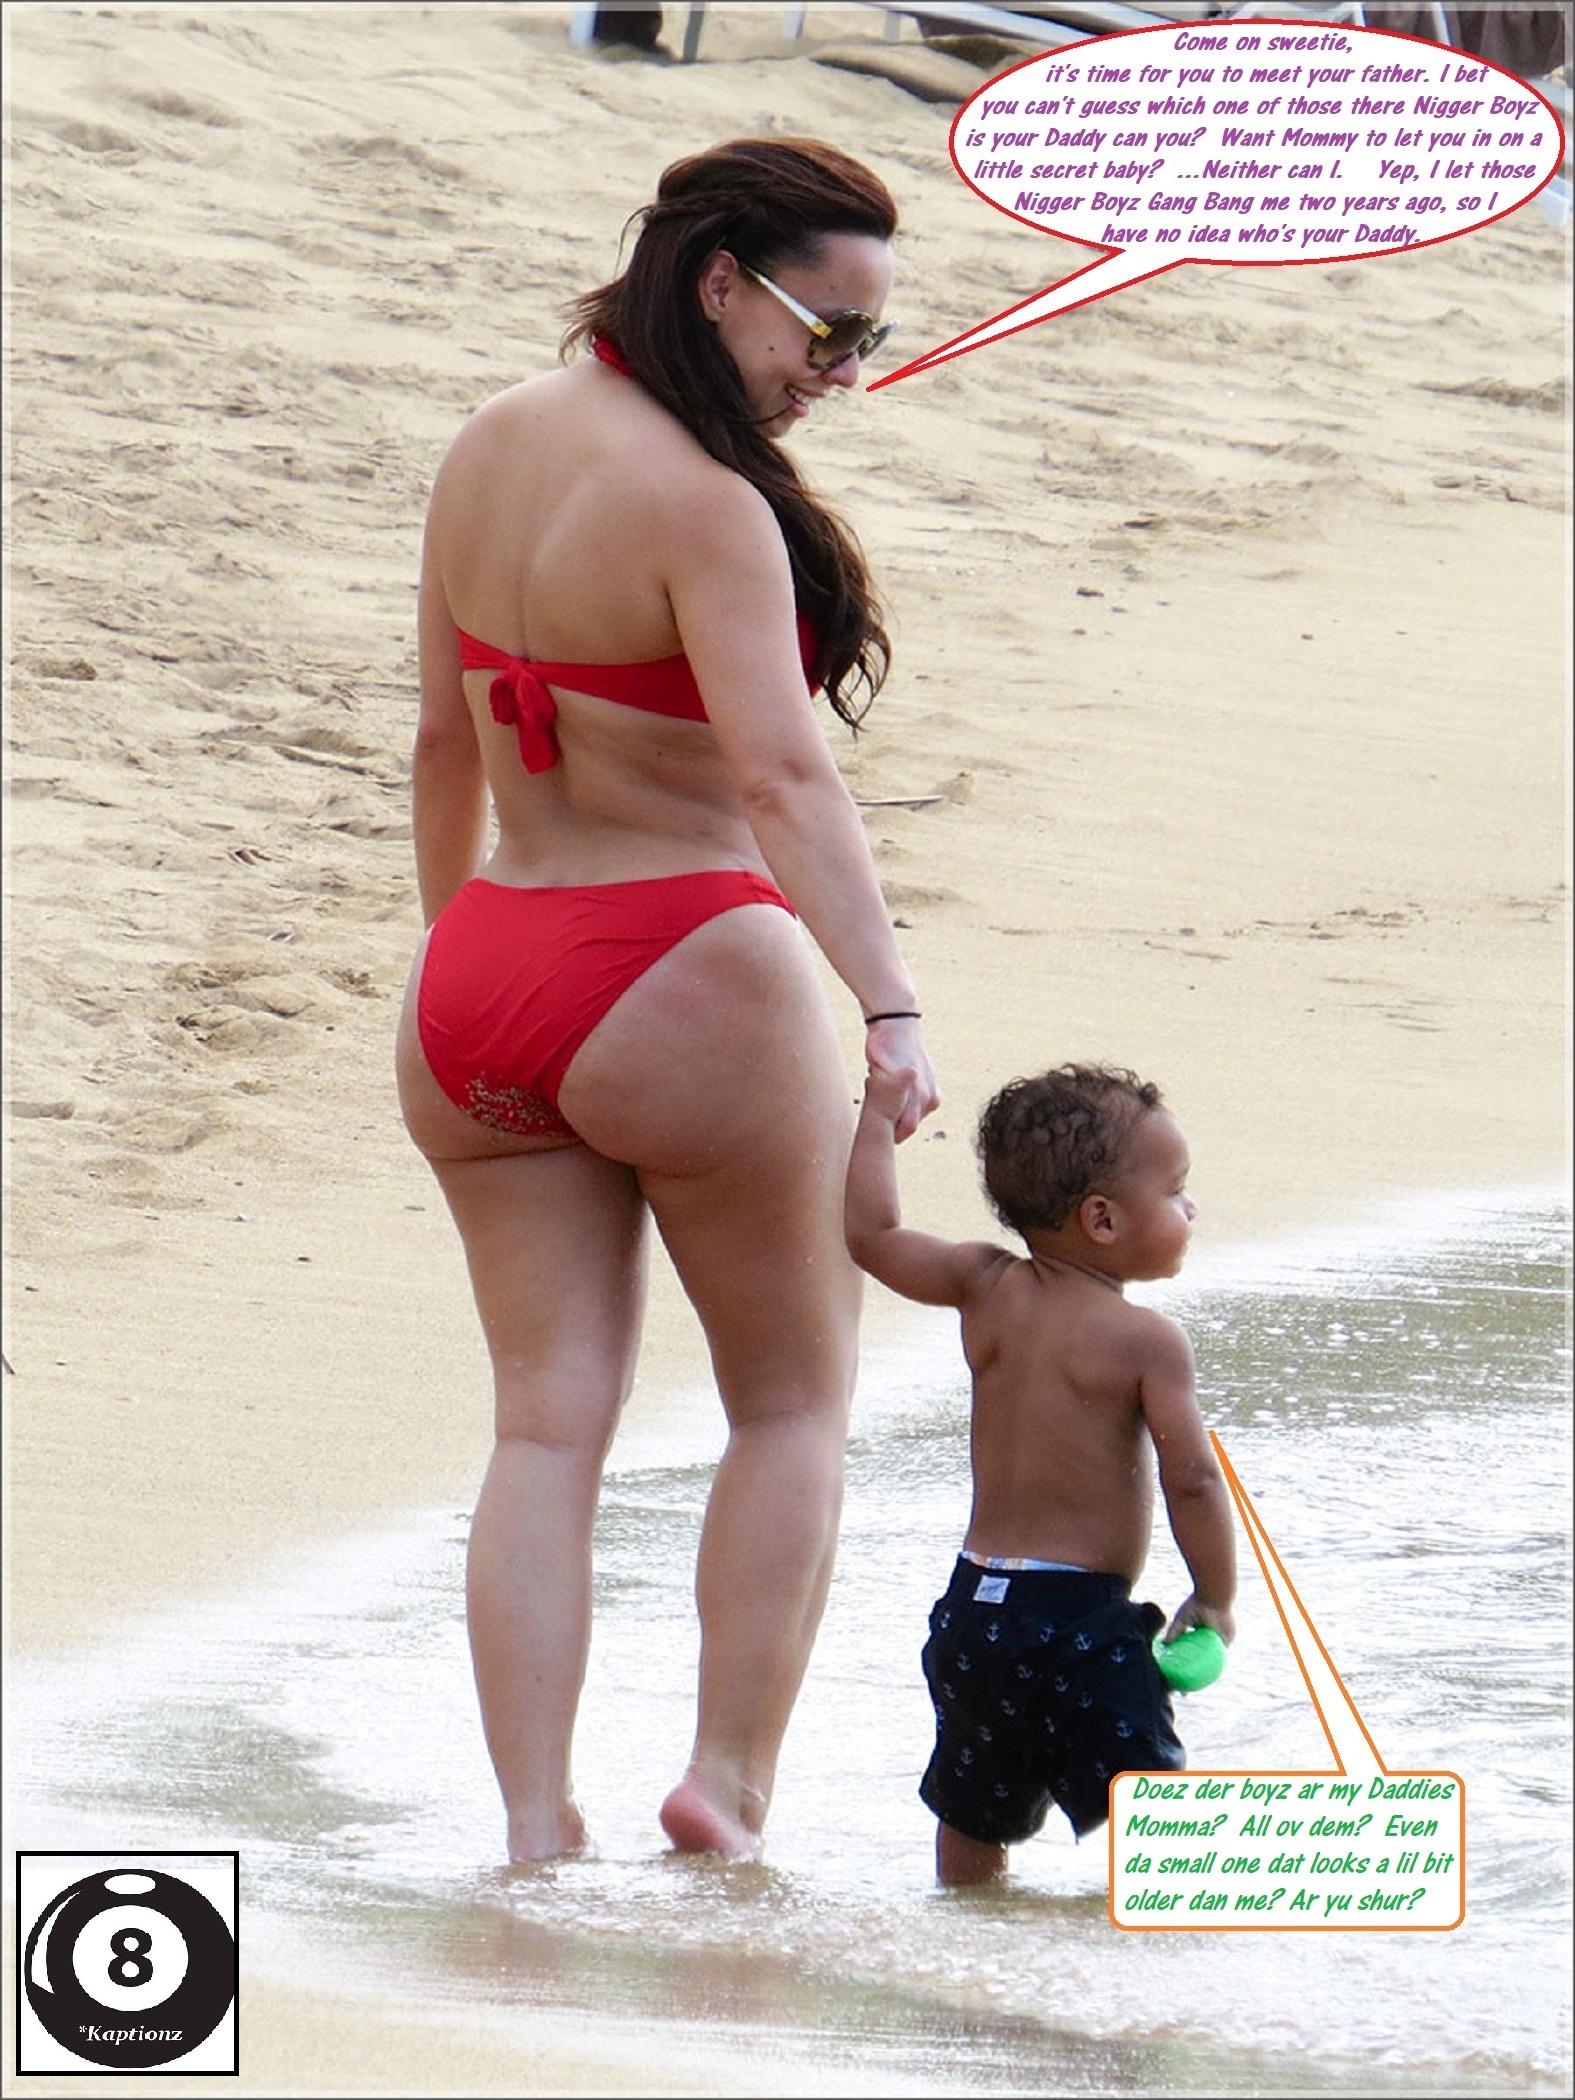 Exclusive - NBA Basketball Wife Adrienne Bosh Has a Beach Date With Son Jack Darkwanderer pic